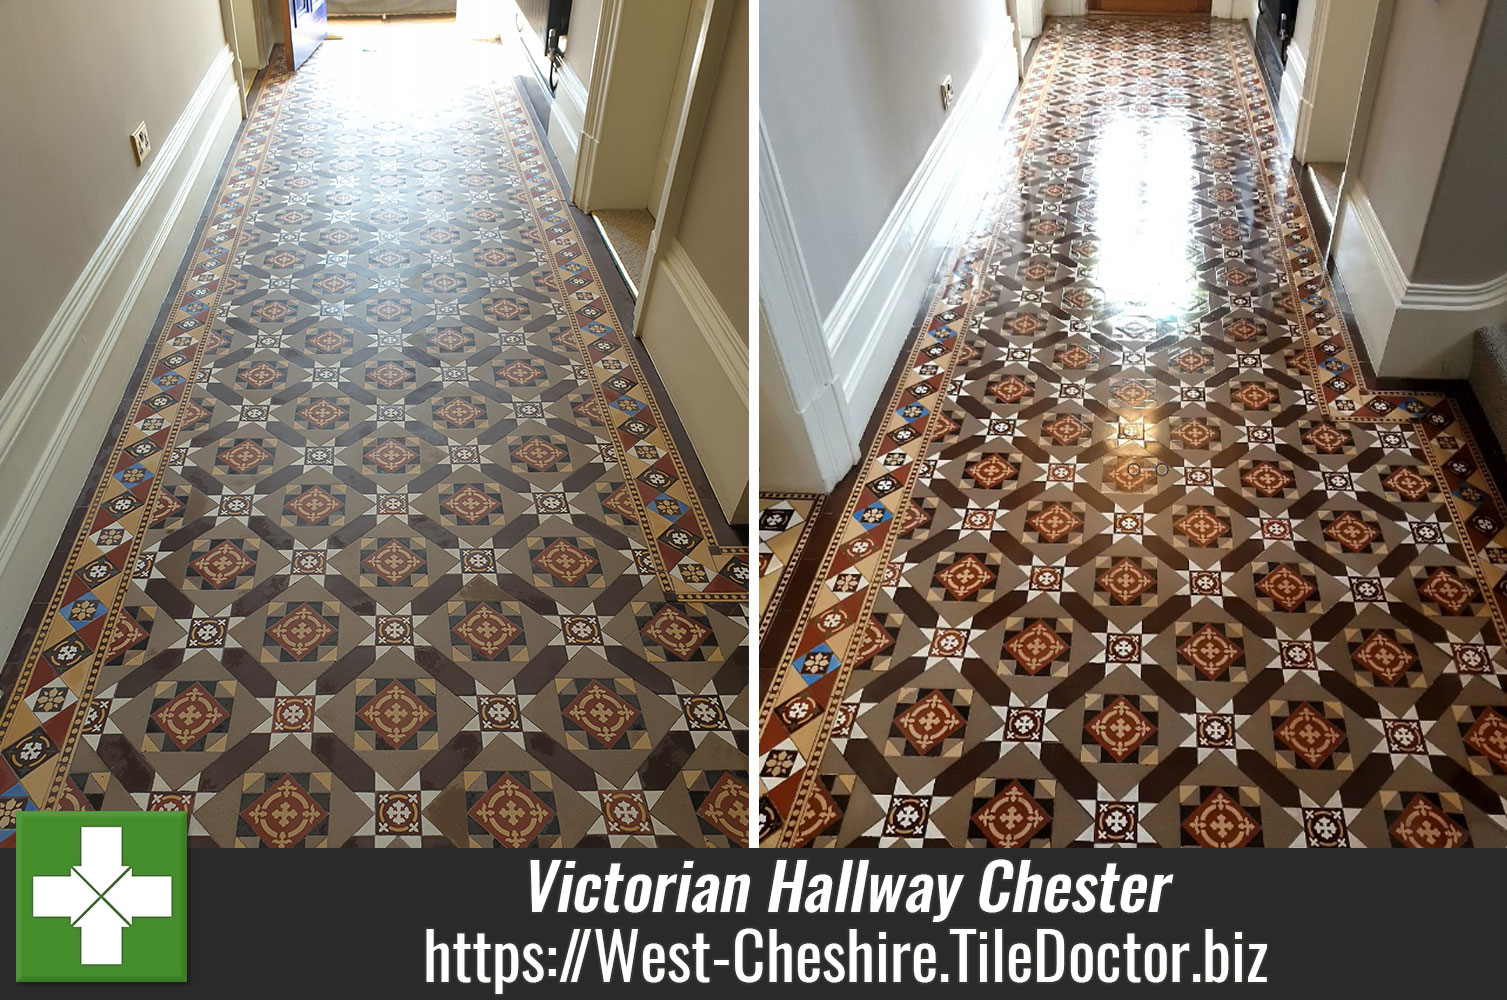 Deep Cleaning Victorian Floor Tiles with Tile Doctor Pro-Clean in Chester